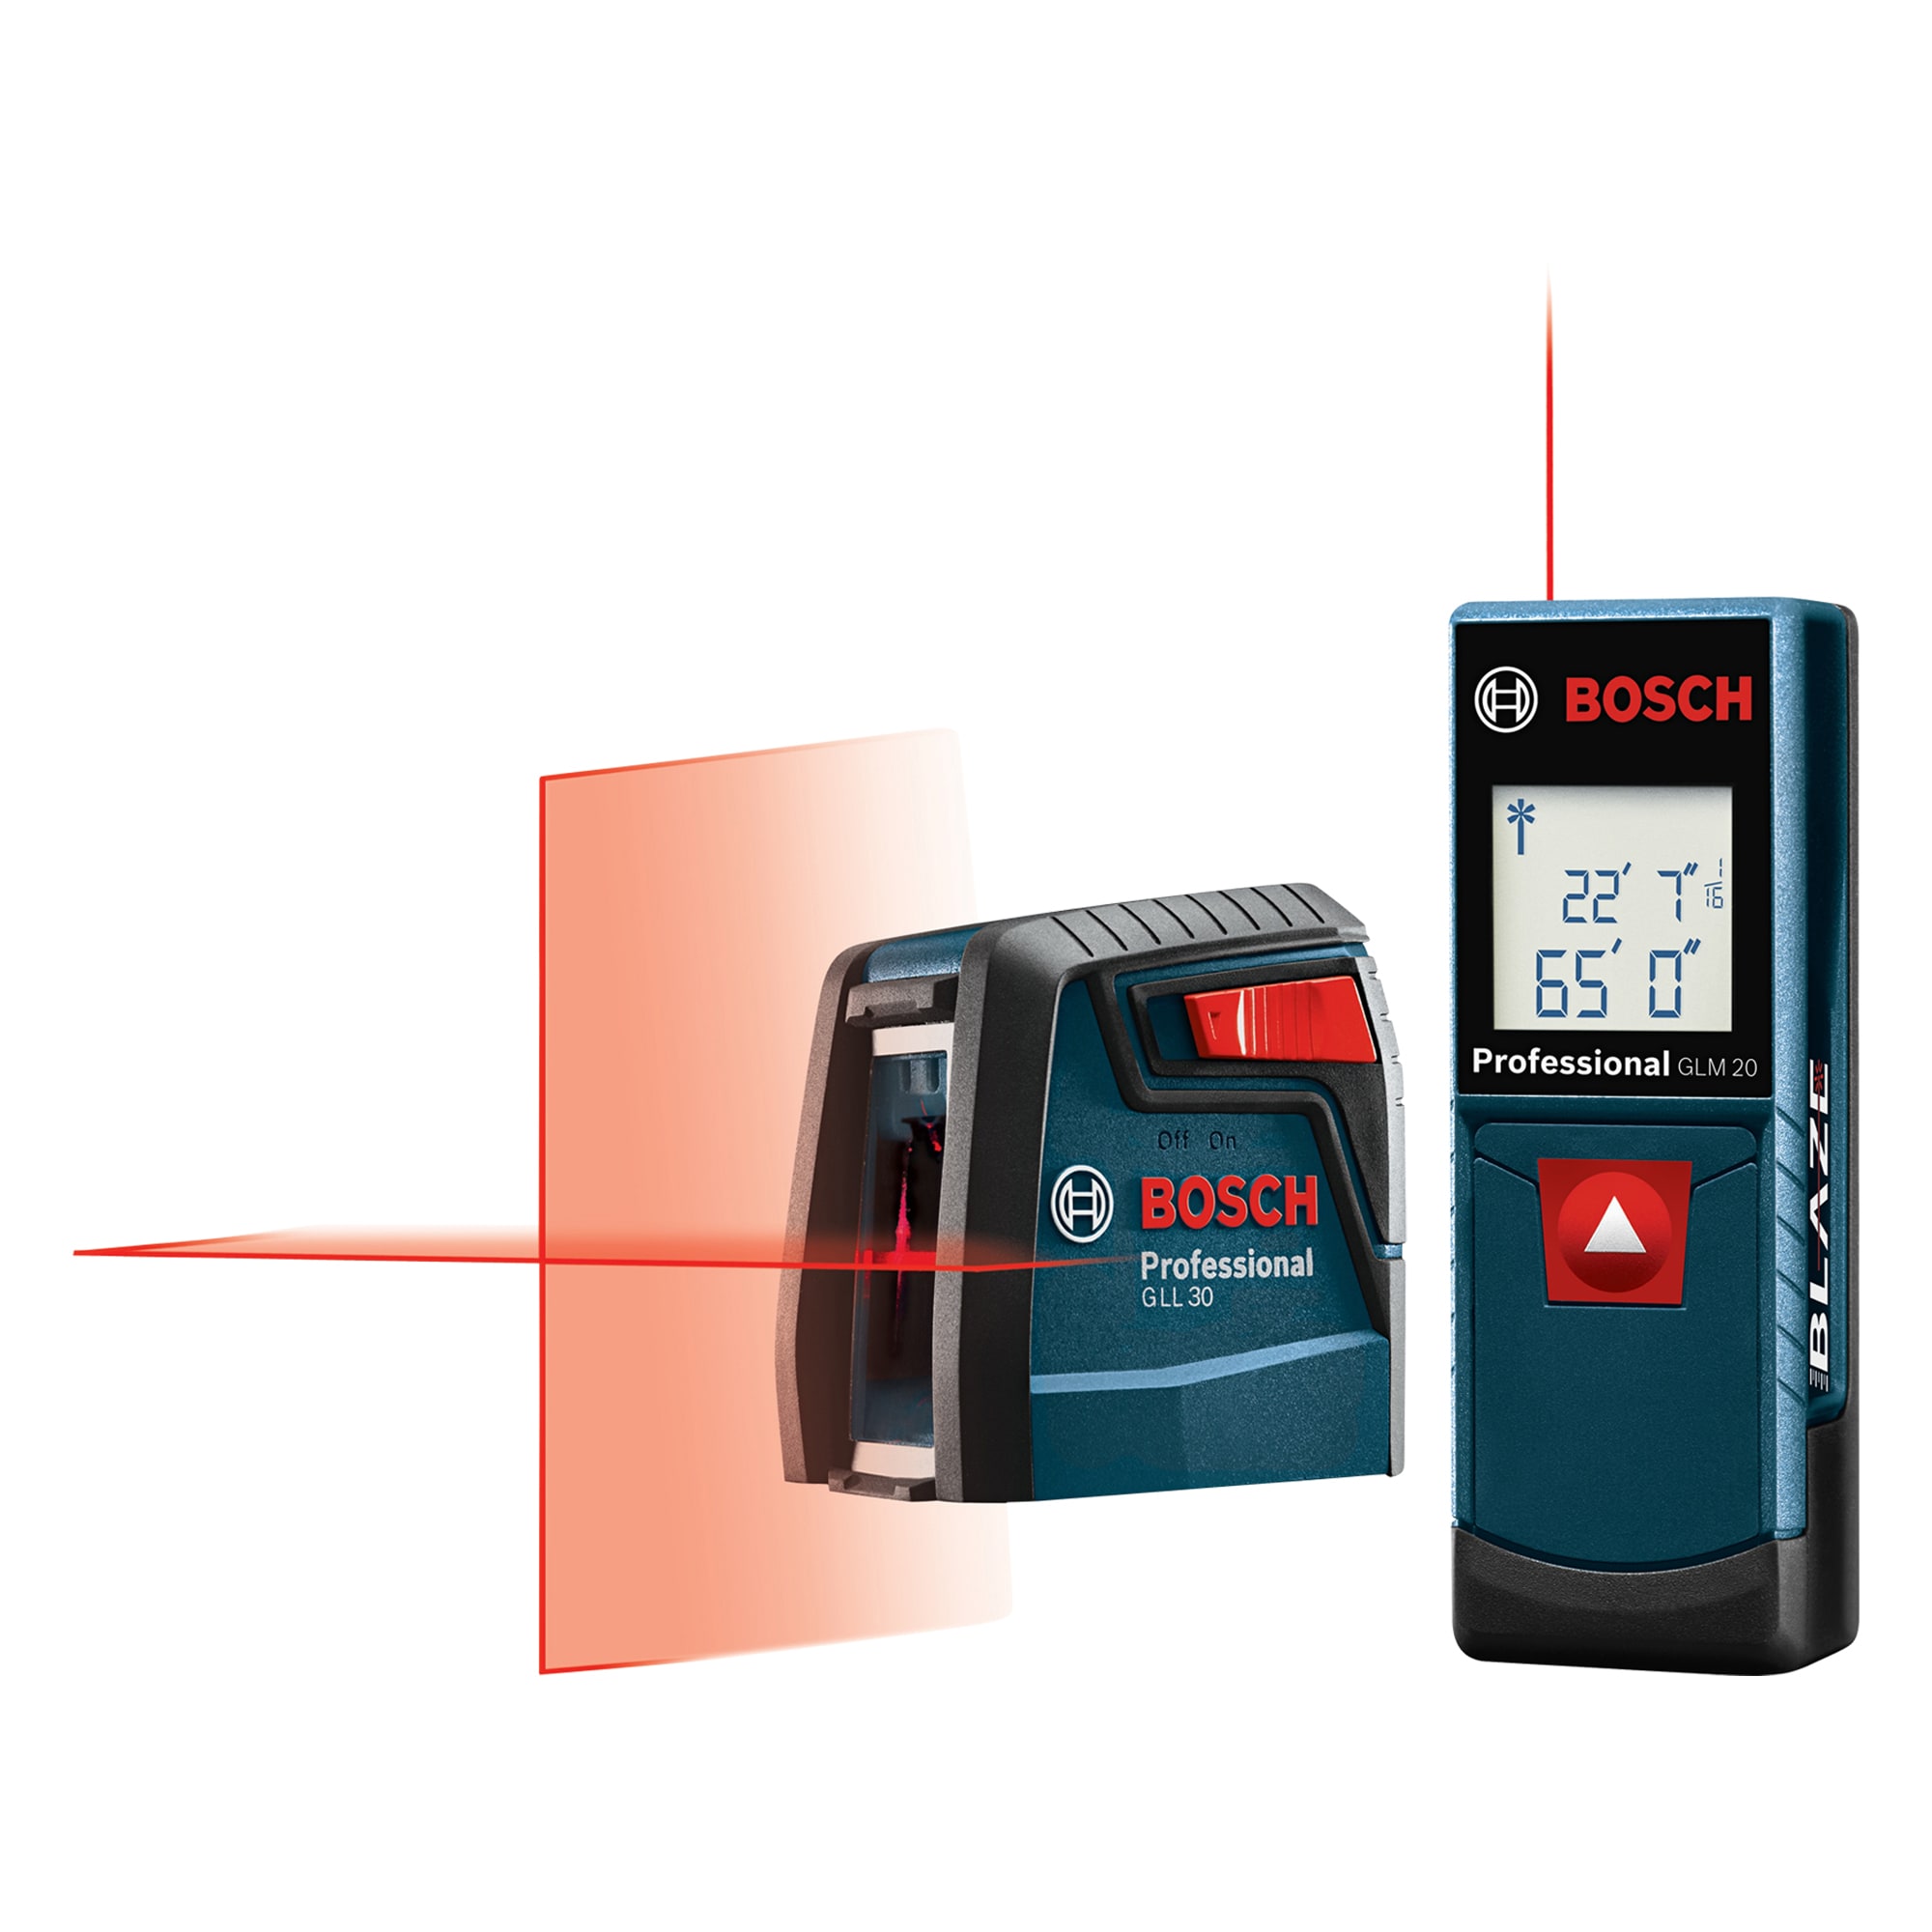 Bosch BLAZE 65 ft. Laser Distance Tape Measuring Tool with Real Time  Measuring GLM 20 X - The Home Depot